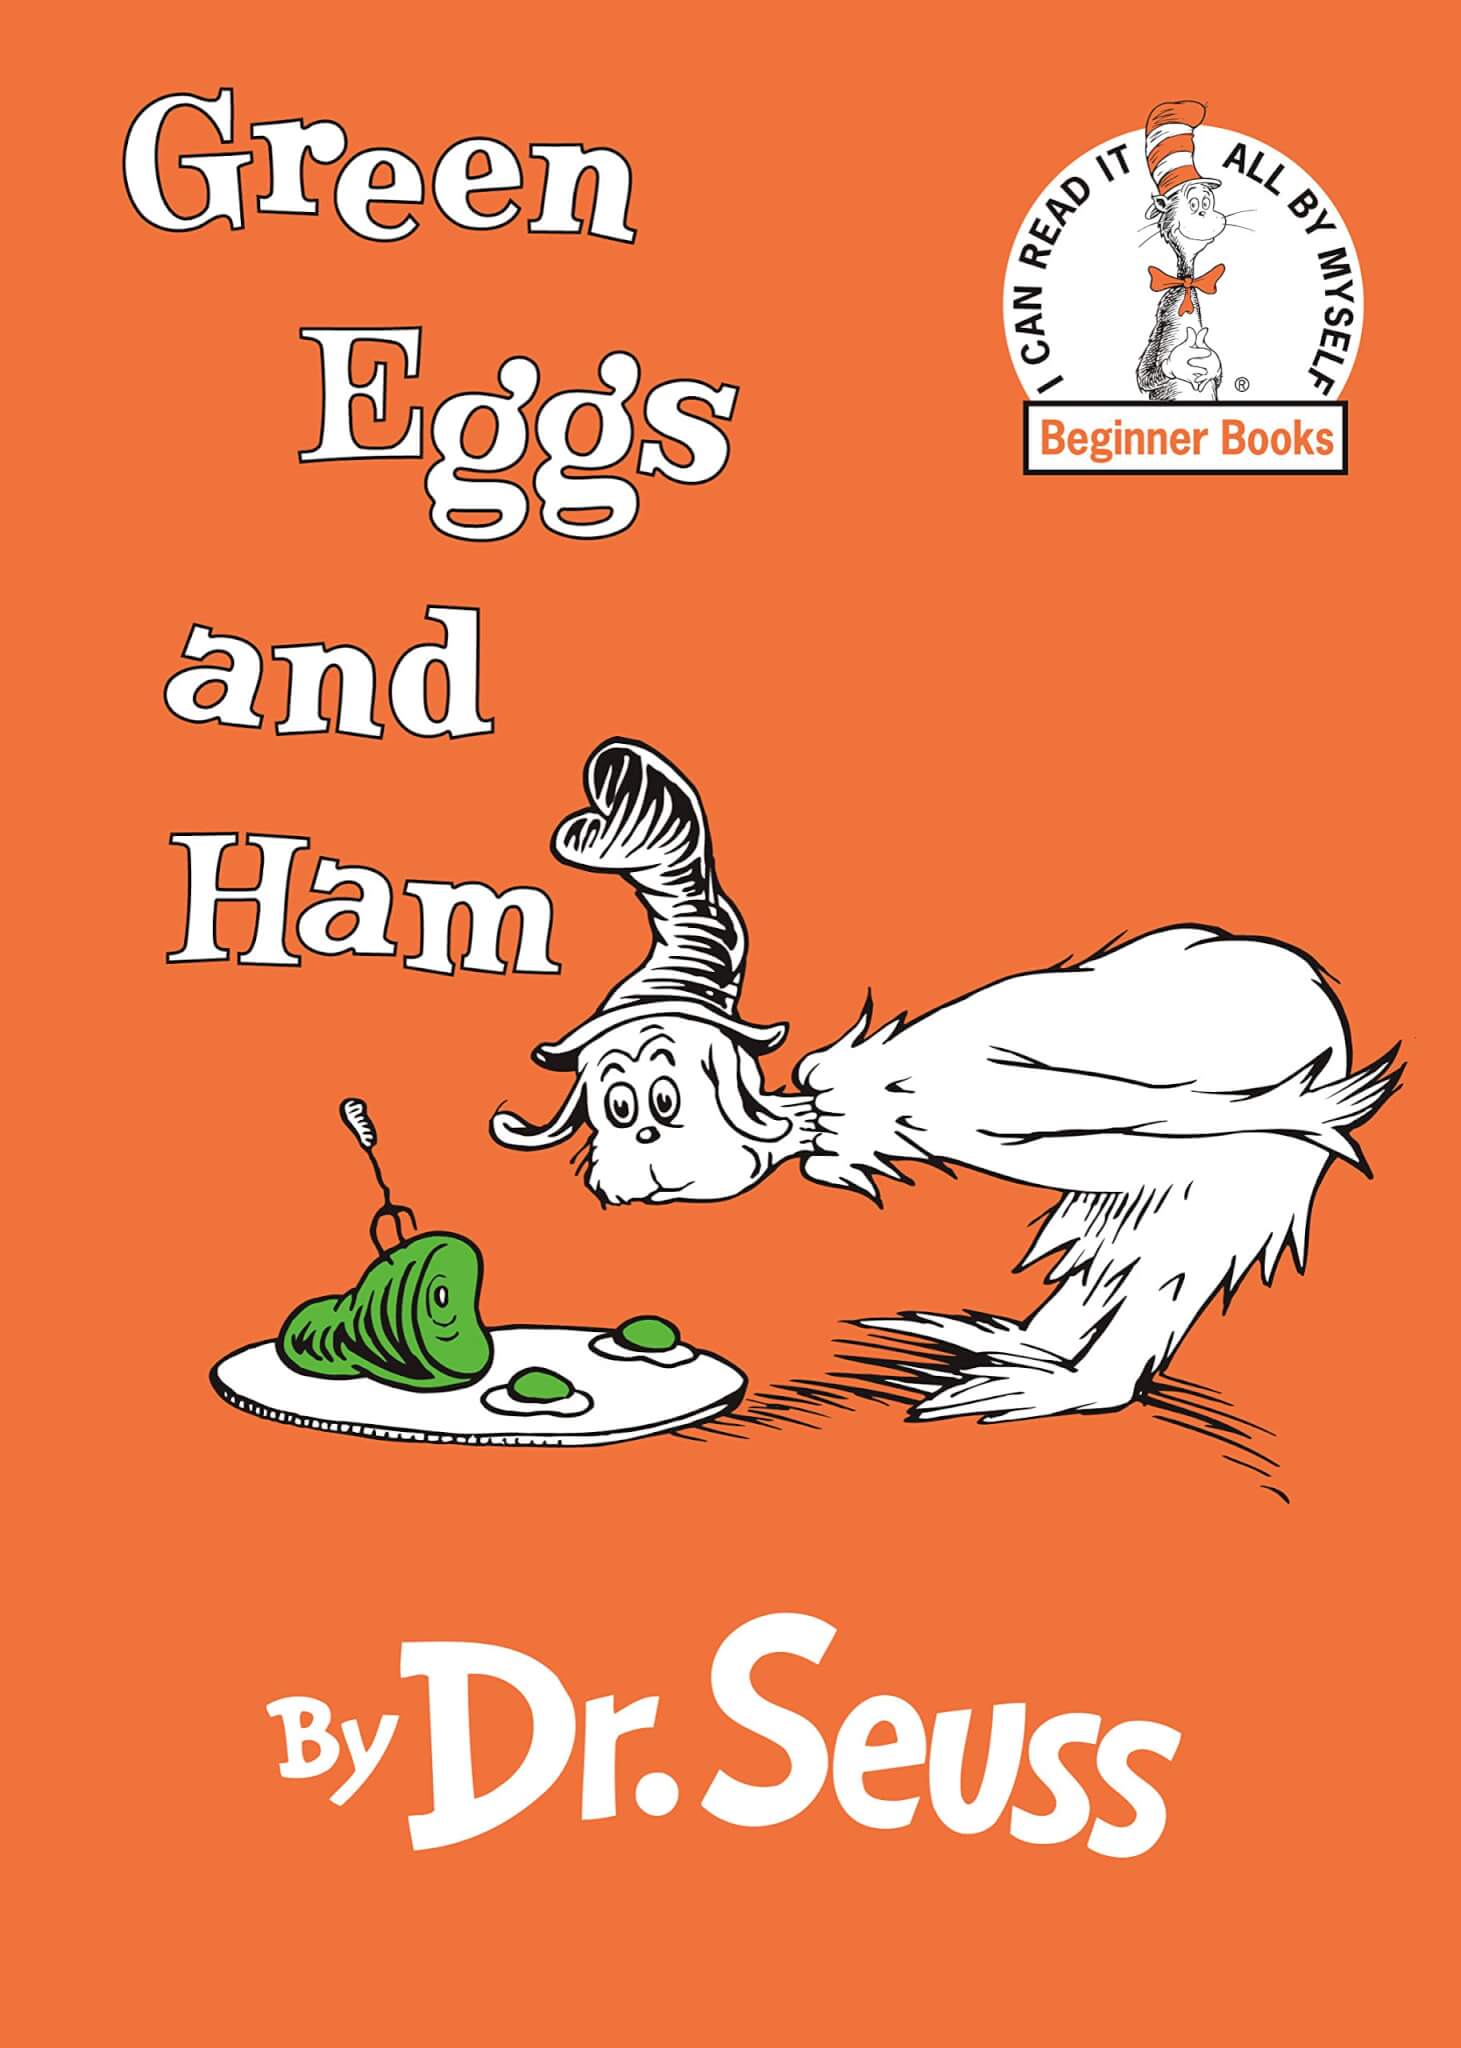 "Green Eggs and Ham" (1960)